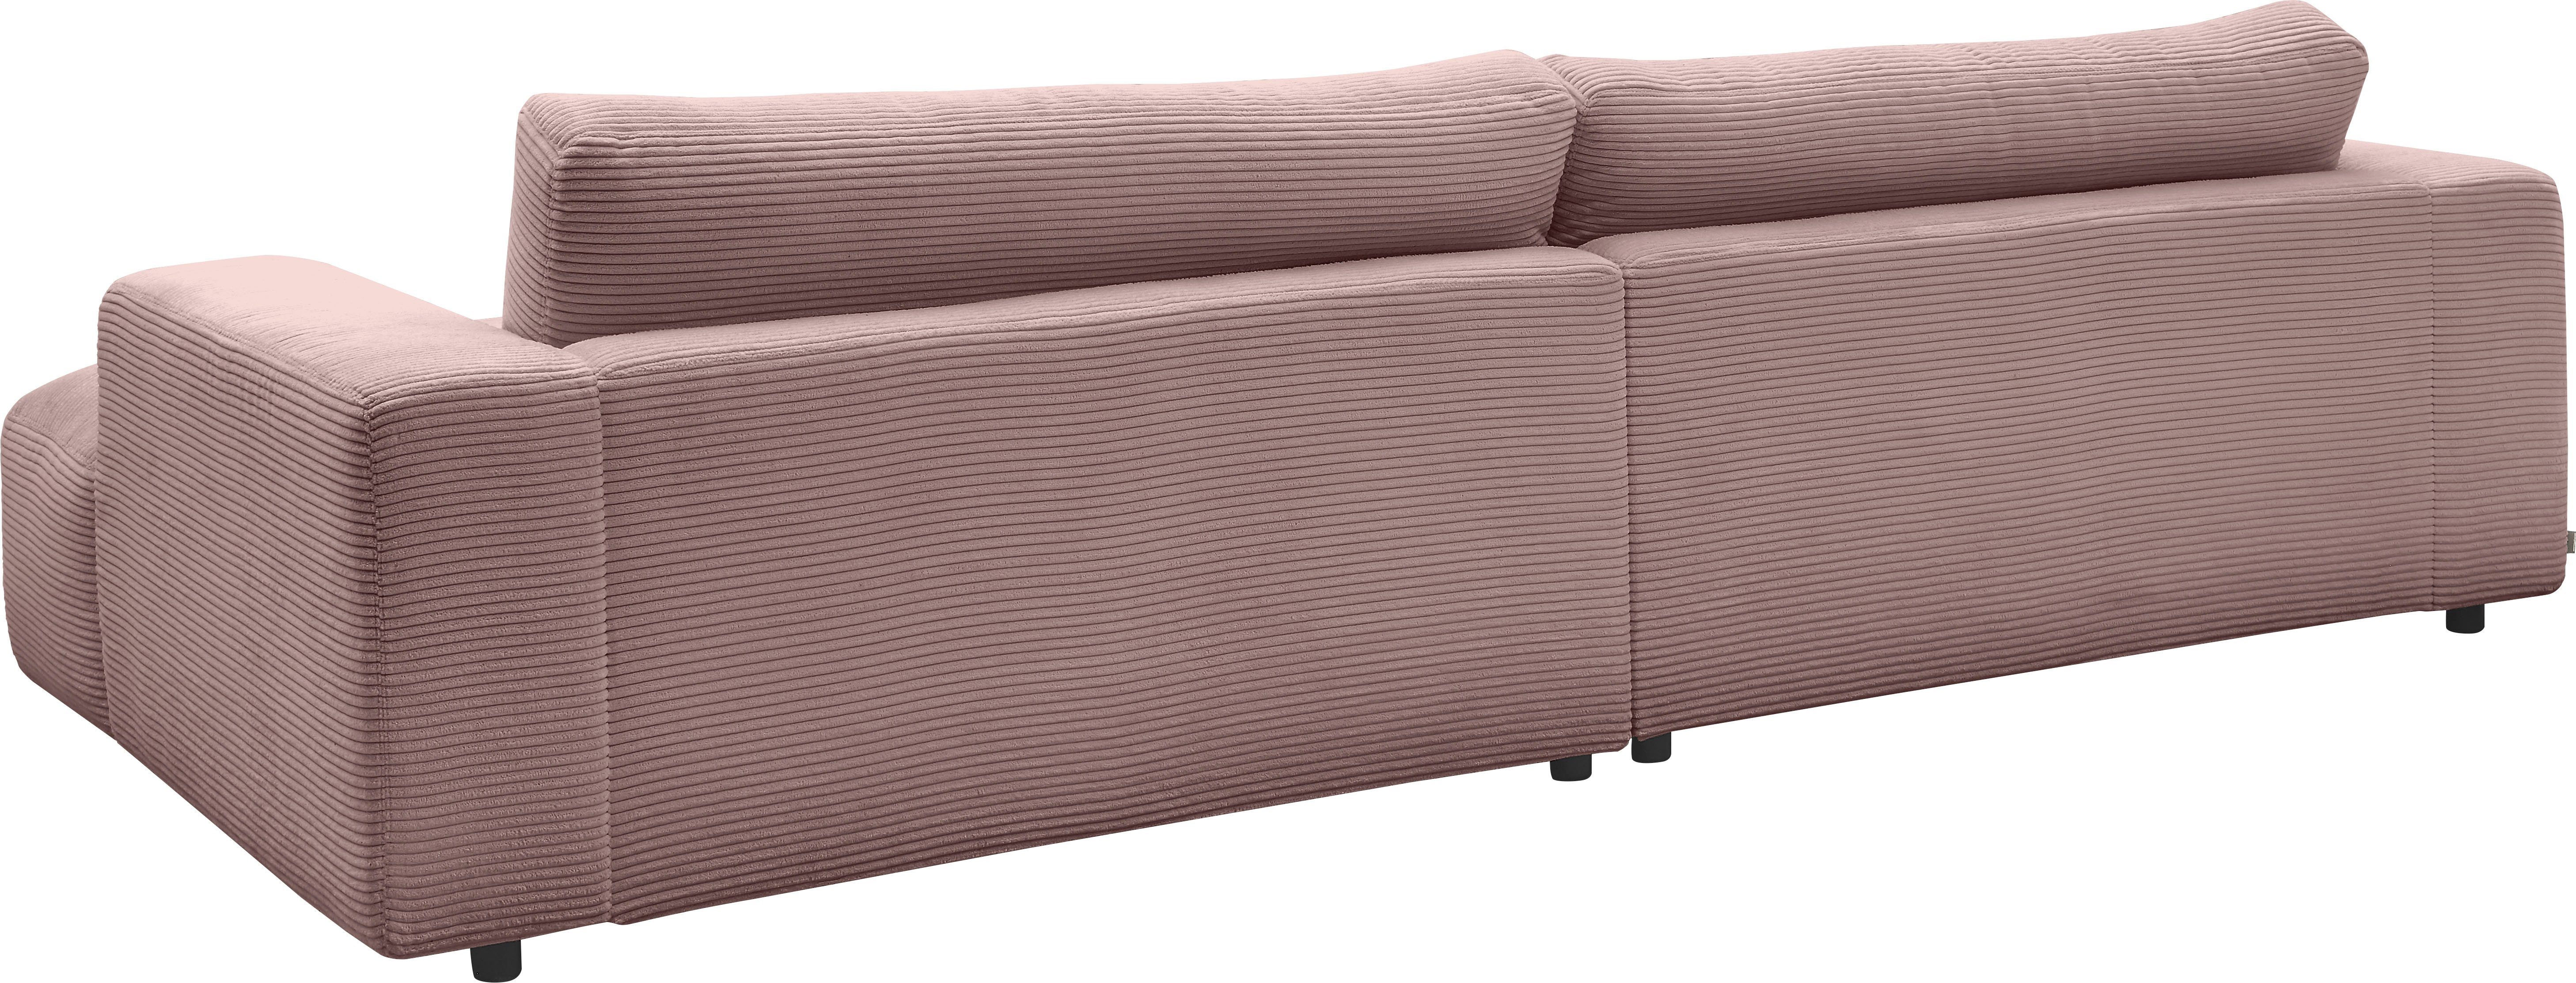 GALLERY branded Cord-Bezug, by cm Loungesofa Breite 292 M Musterring Lucia, rosa